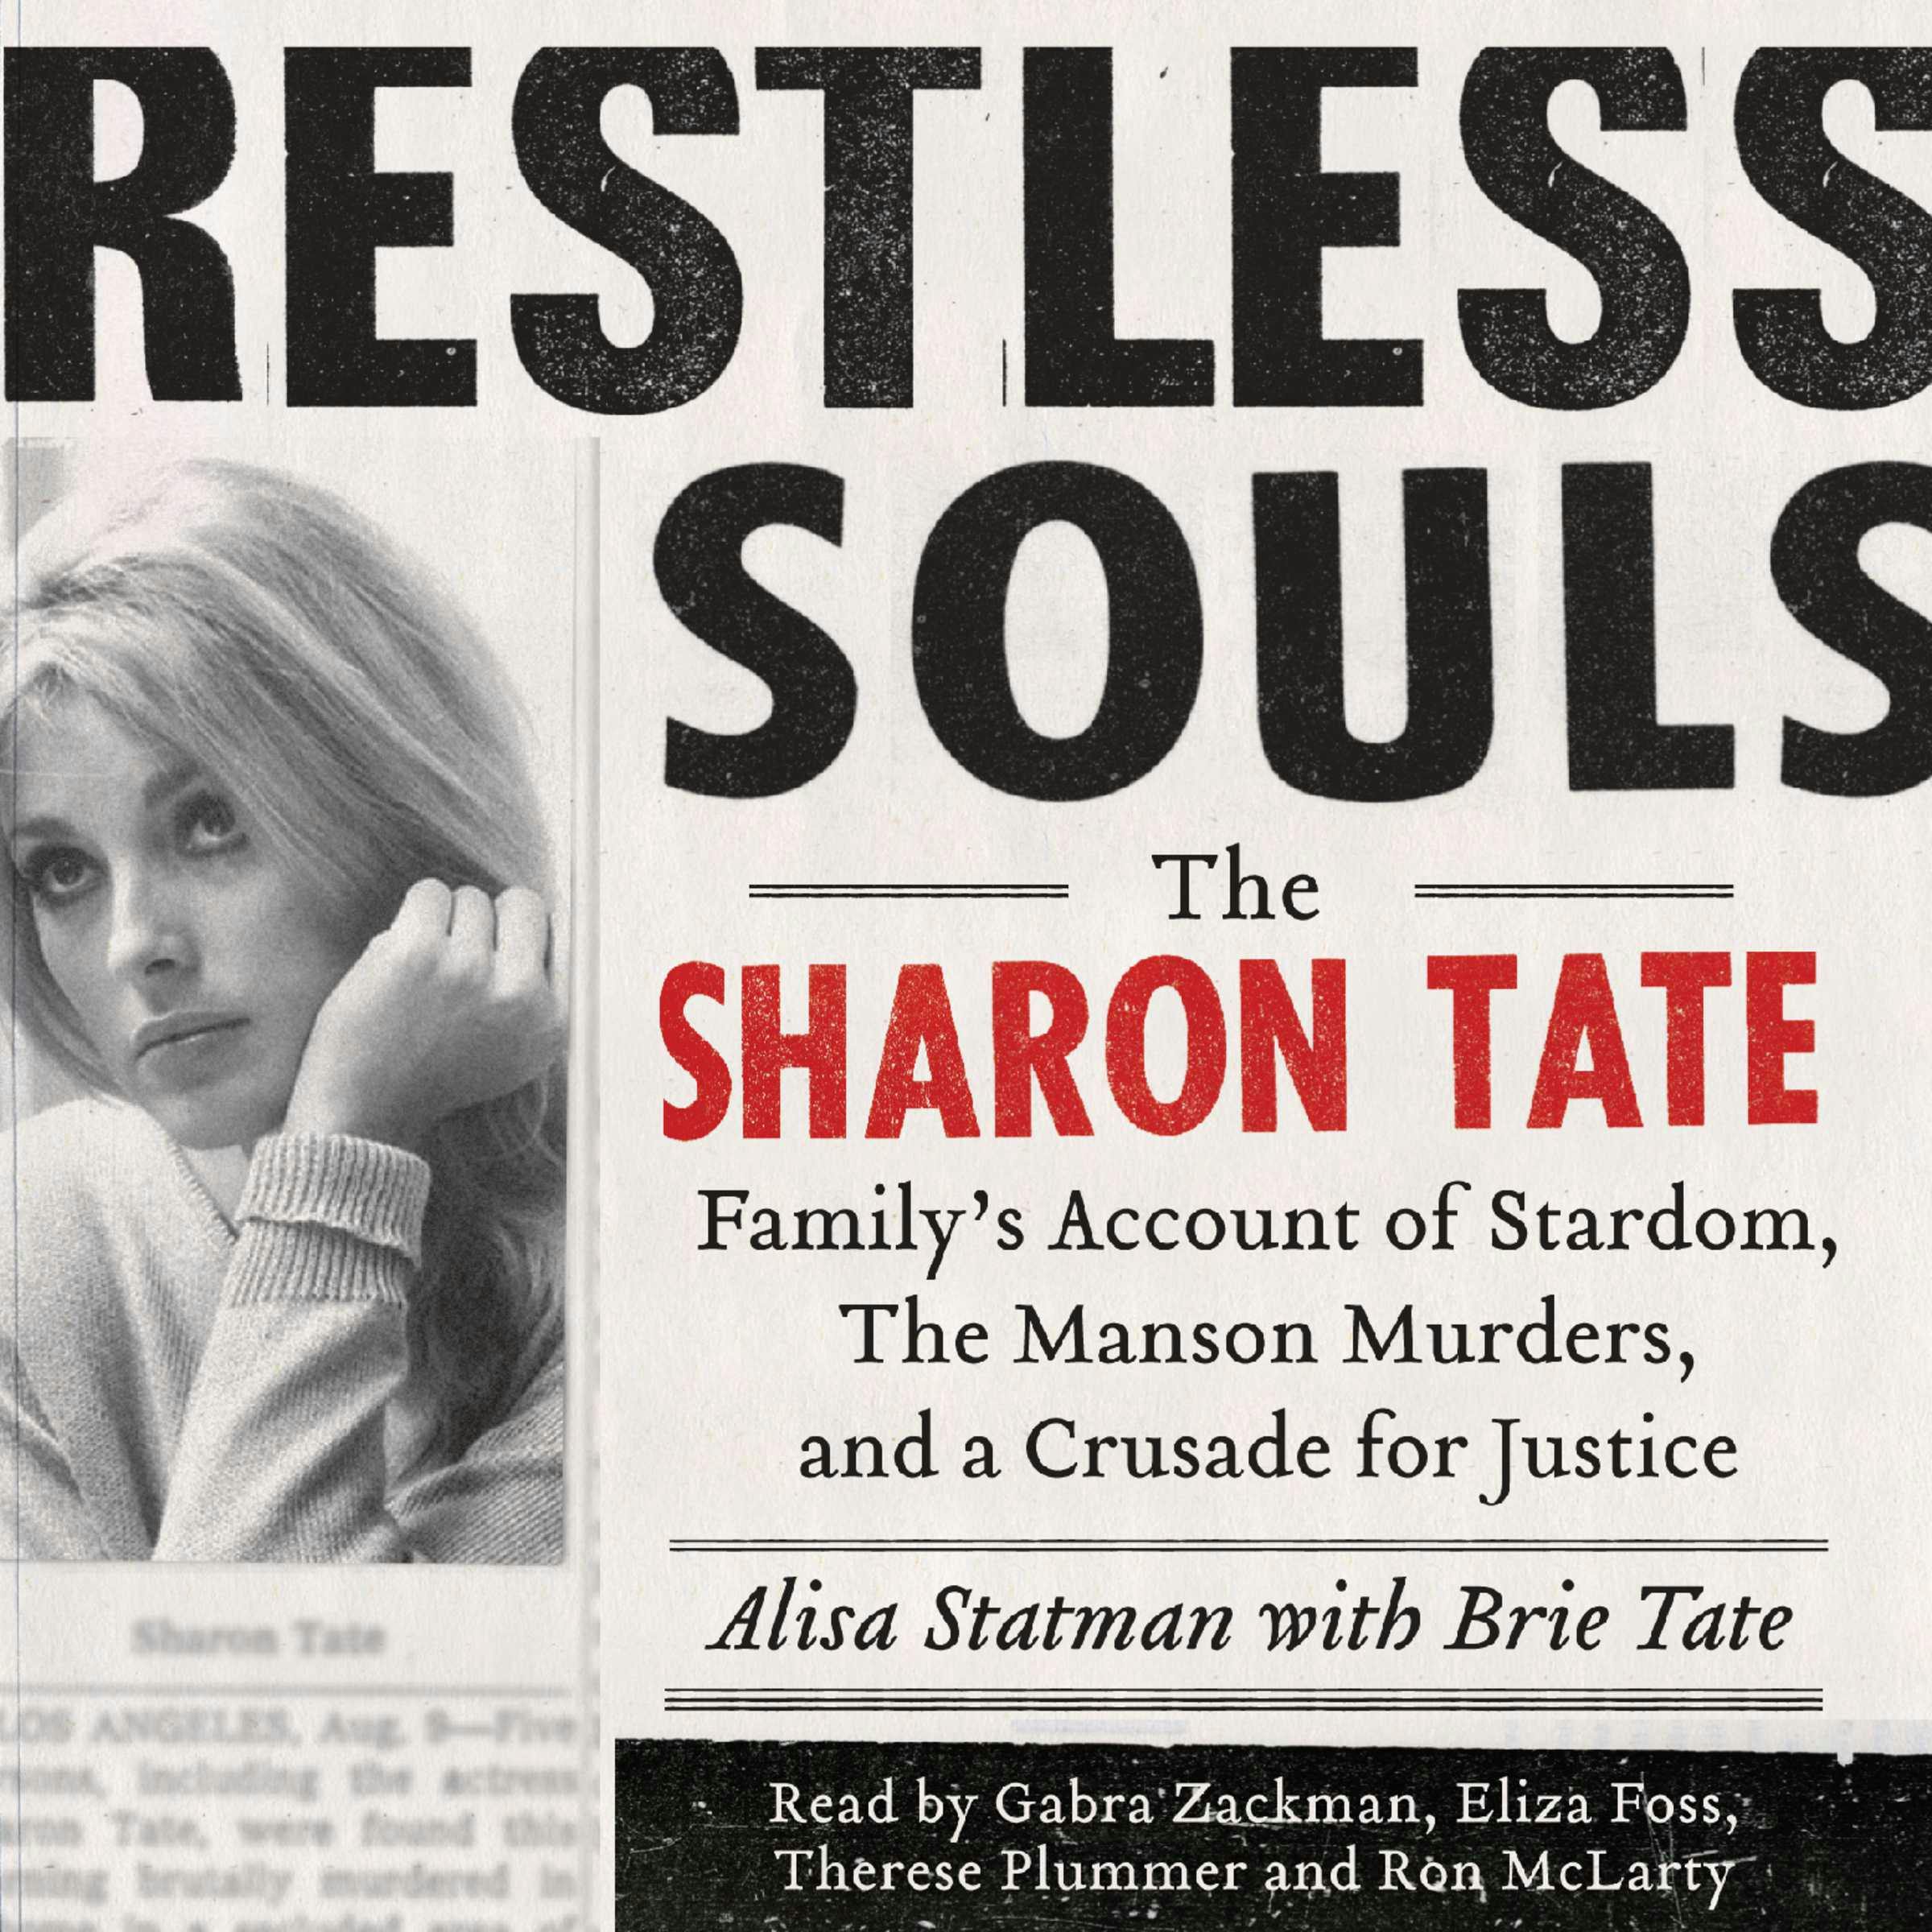 Restless Souls: The Sharon Tate Family's Account of Stardom, Murder, and a Crusade - Alisa Statman, Brie Tate